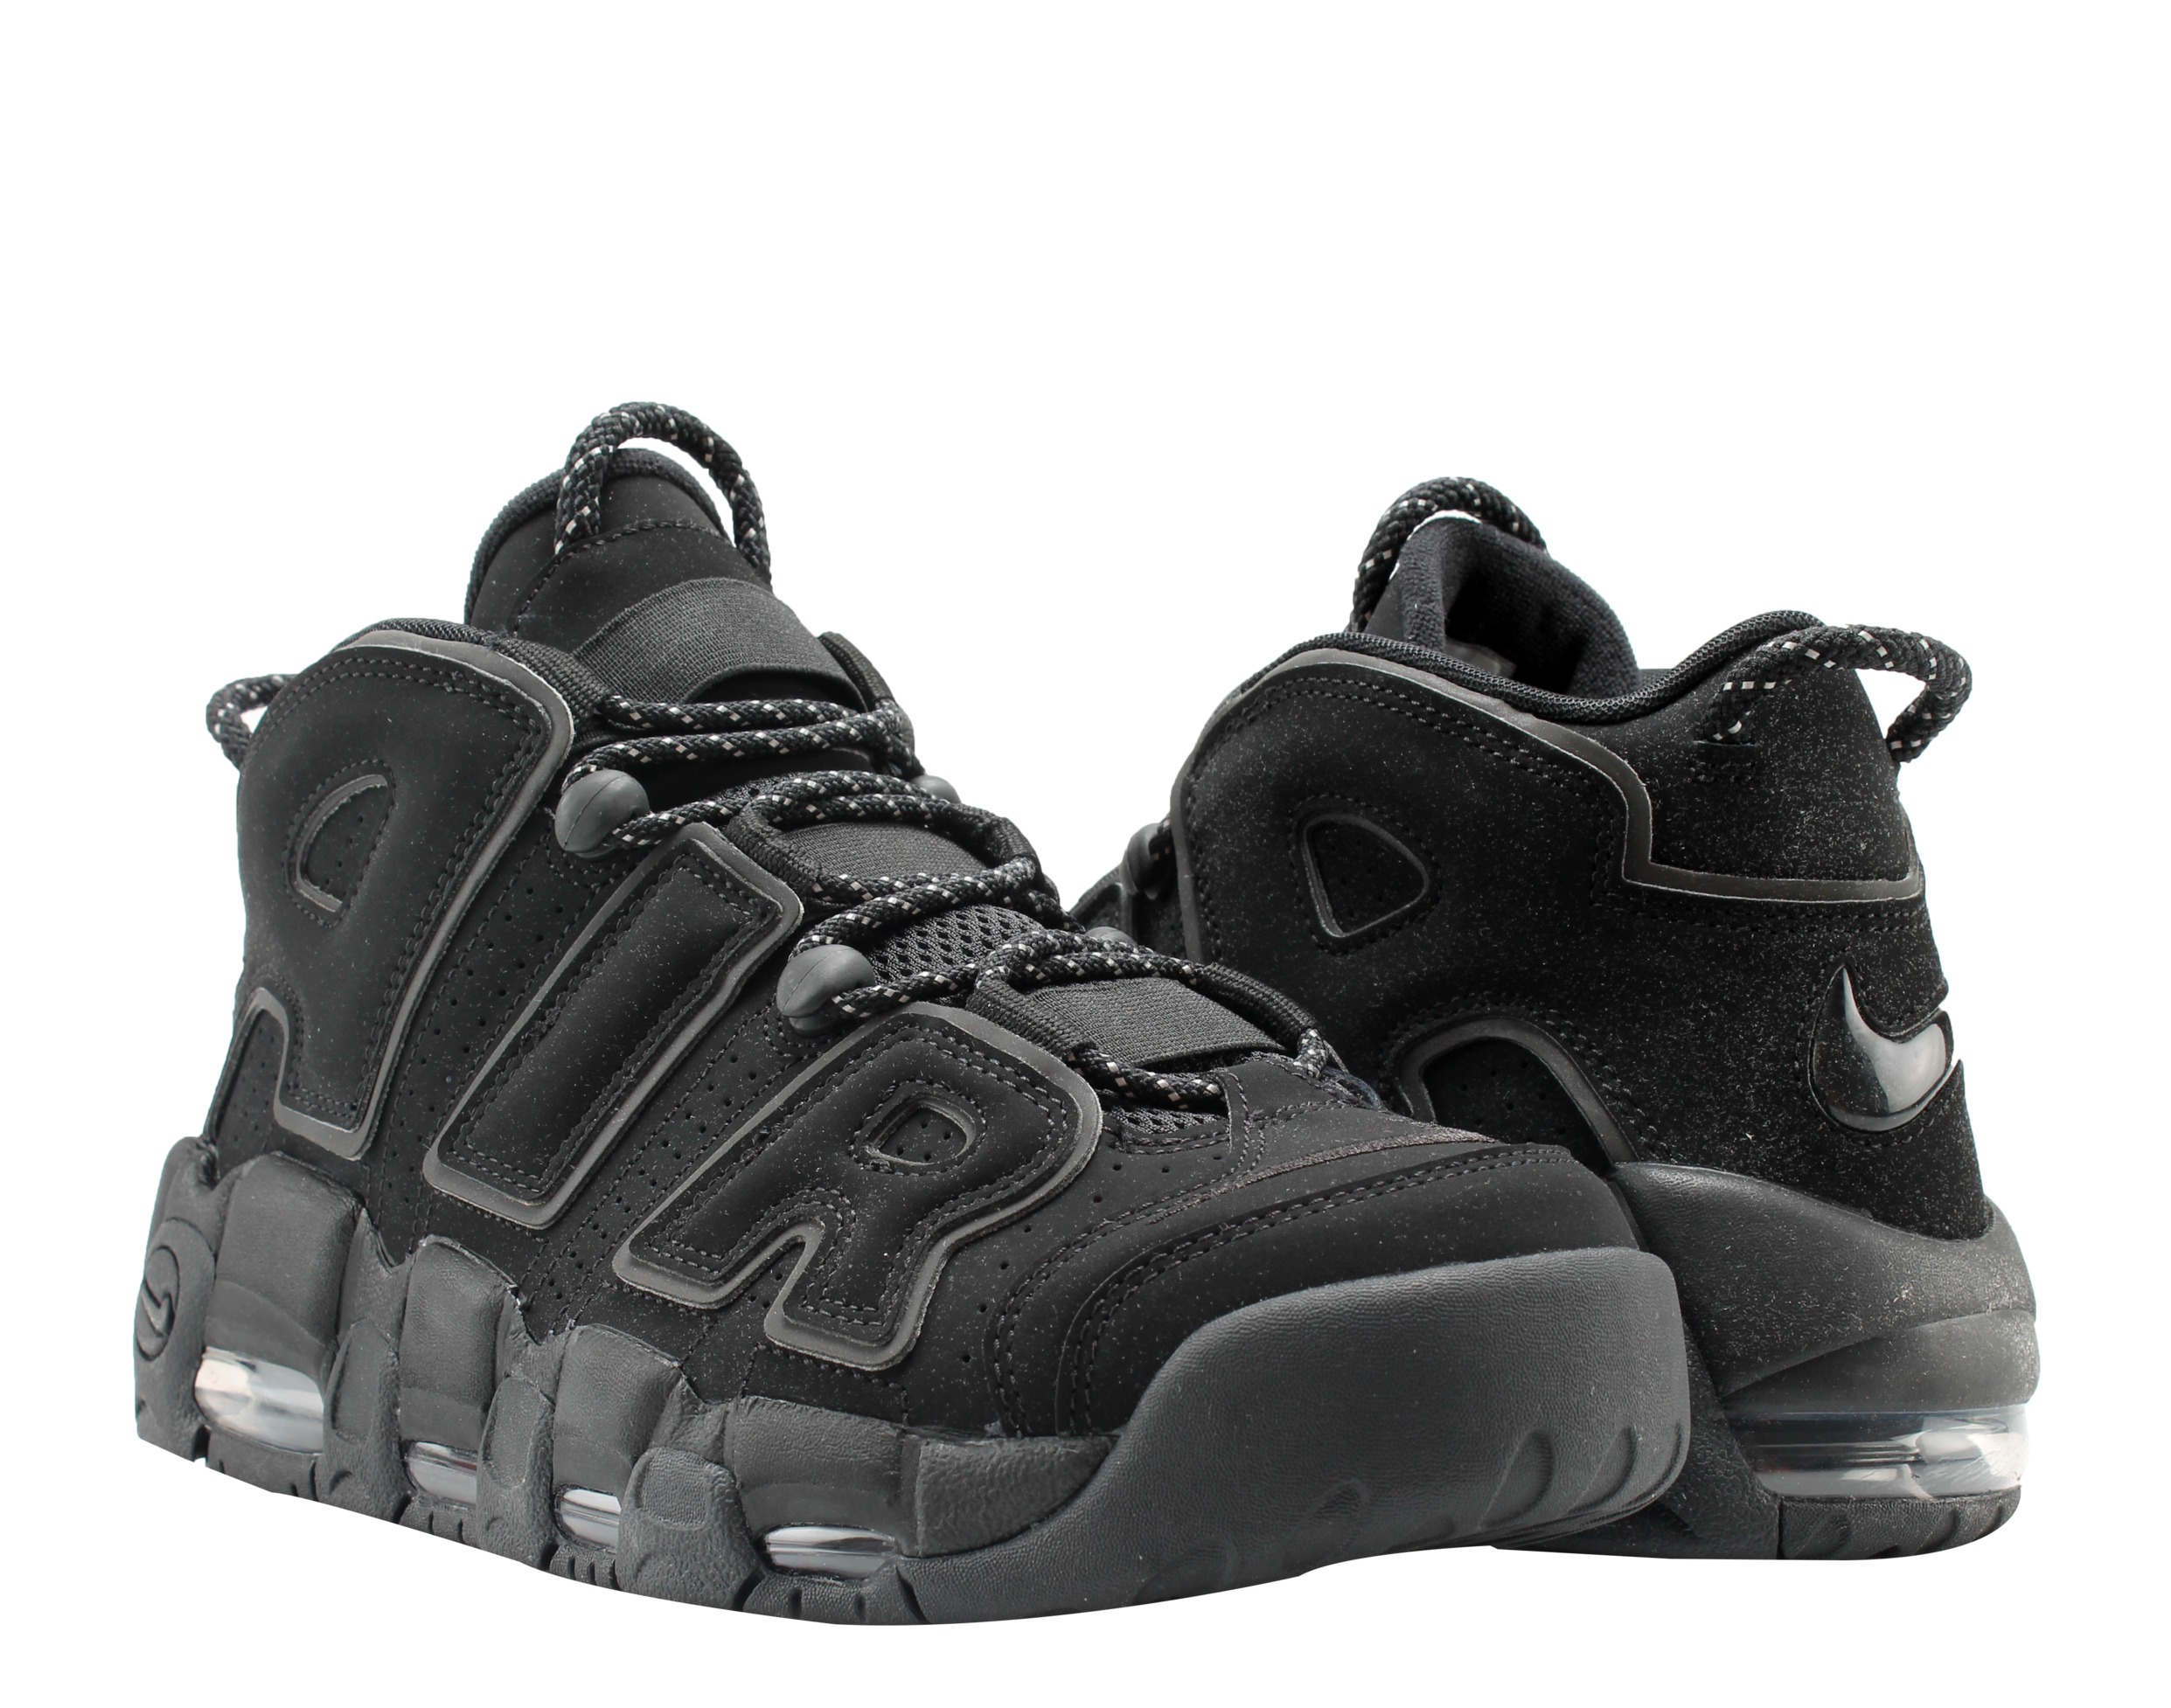 Nike Air More Uptempo Men's Basketball Shoes Size 8 - image 1 of 6